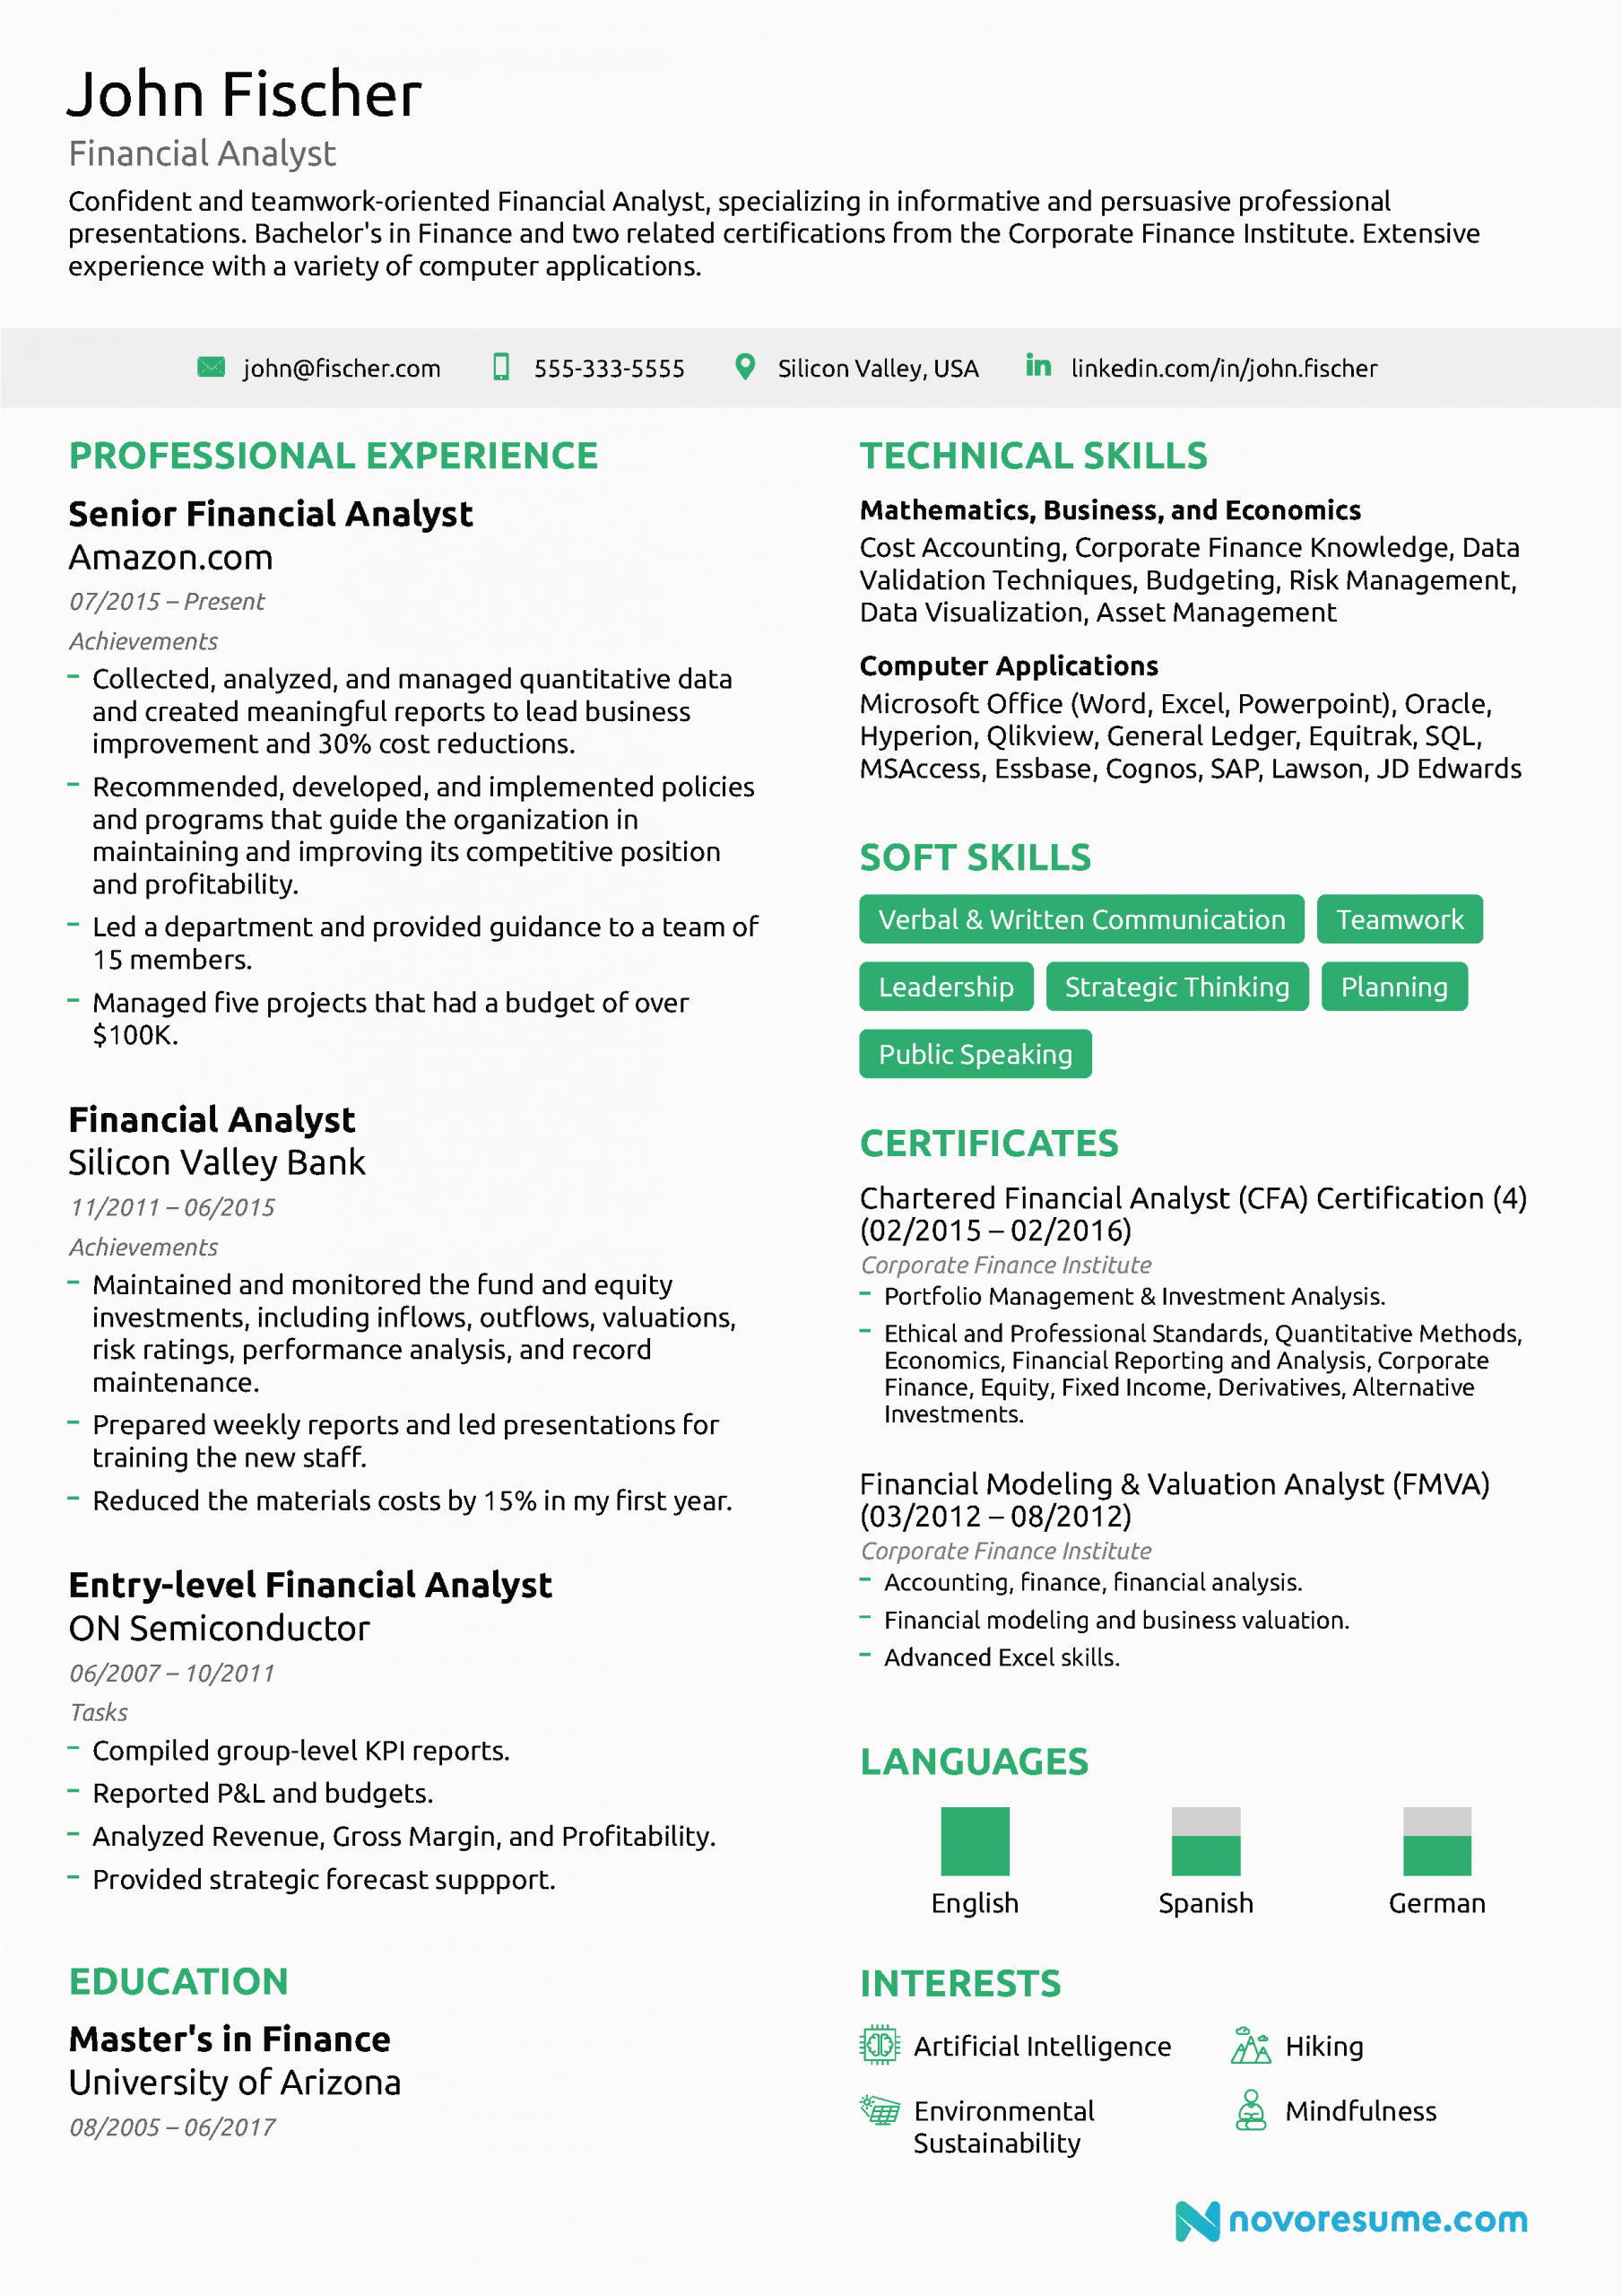 Sample Resume for Banking and Finance Graduate Financial Analyst Resume [the Ultimate 2021 Guide]